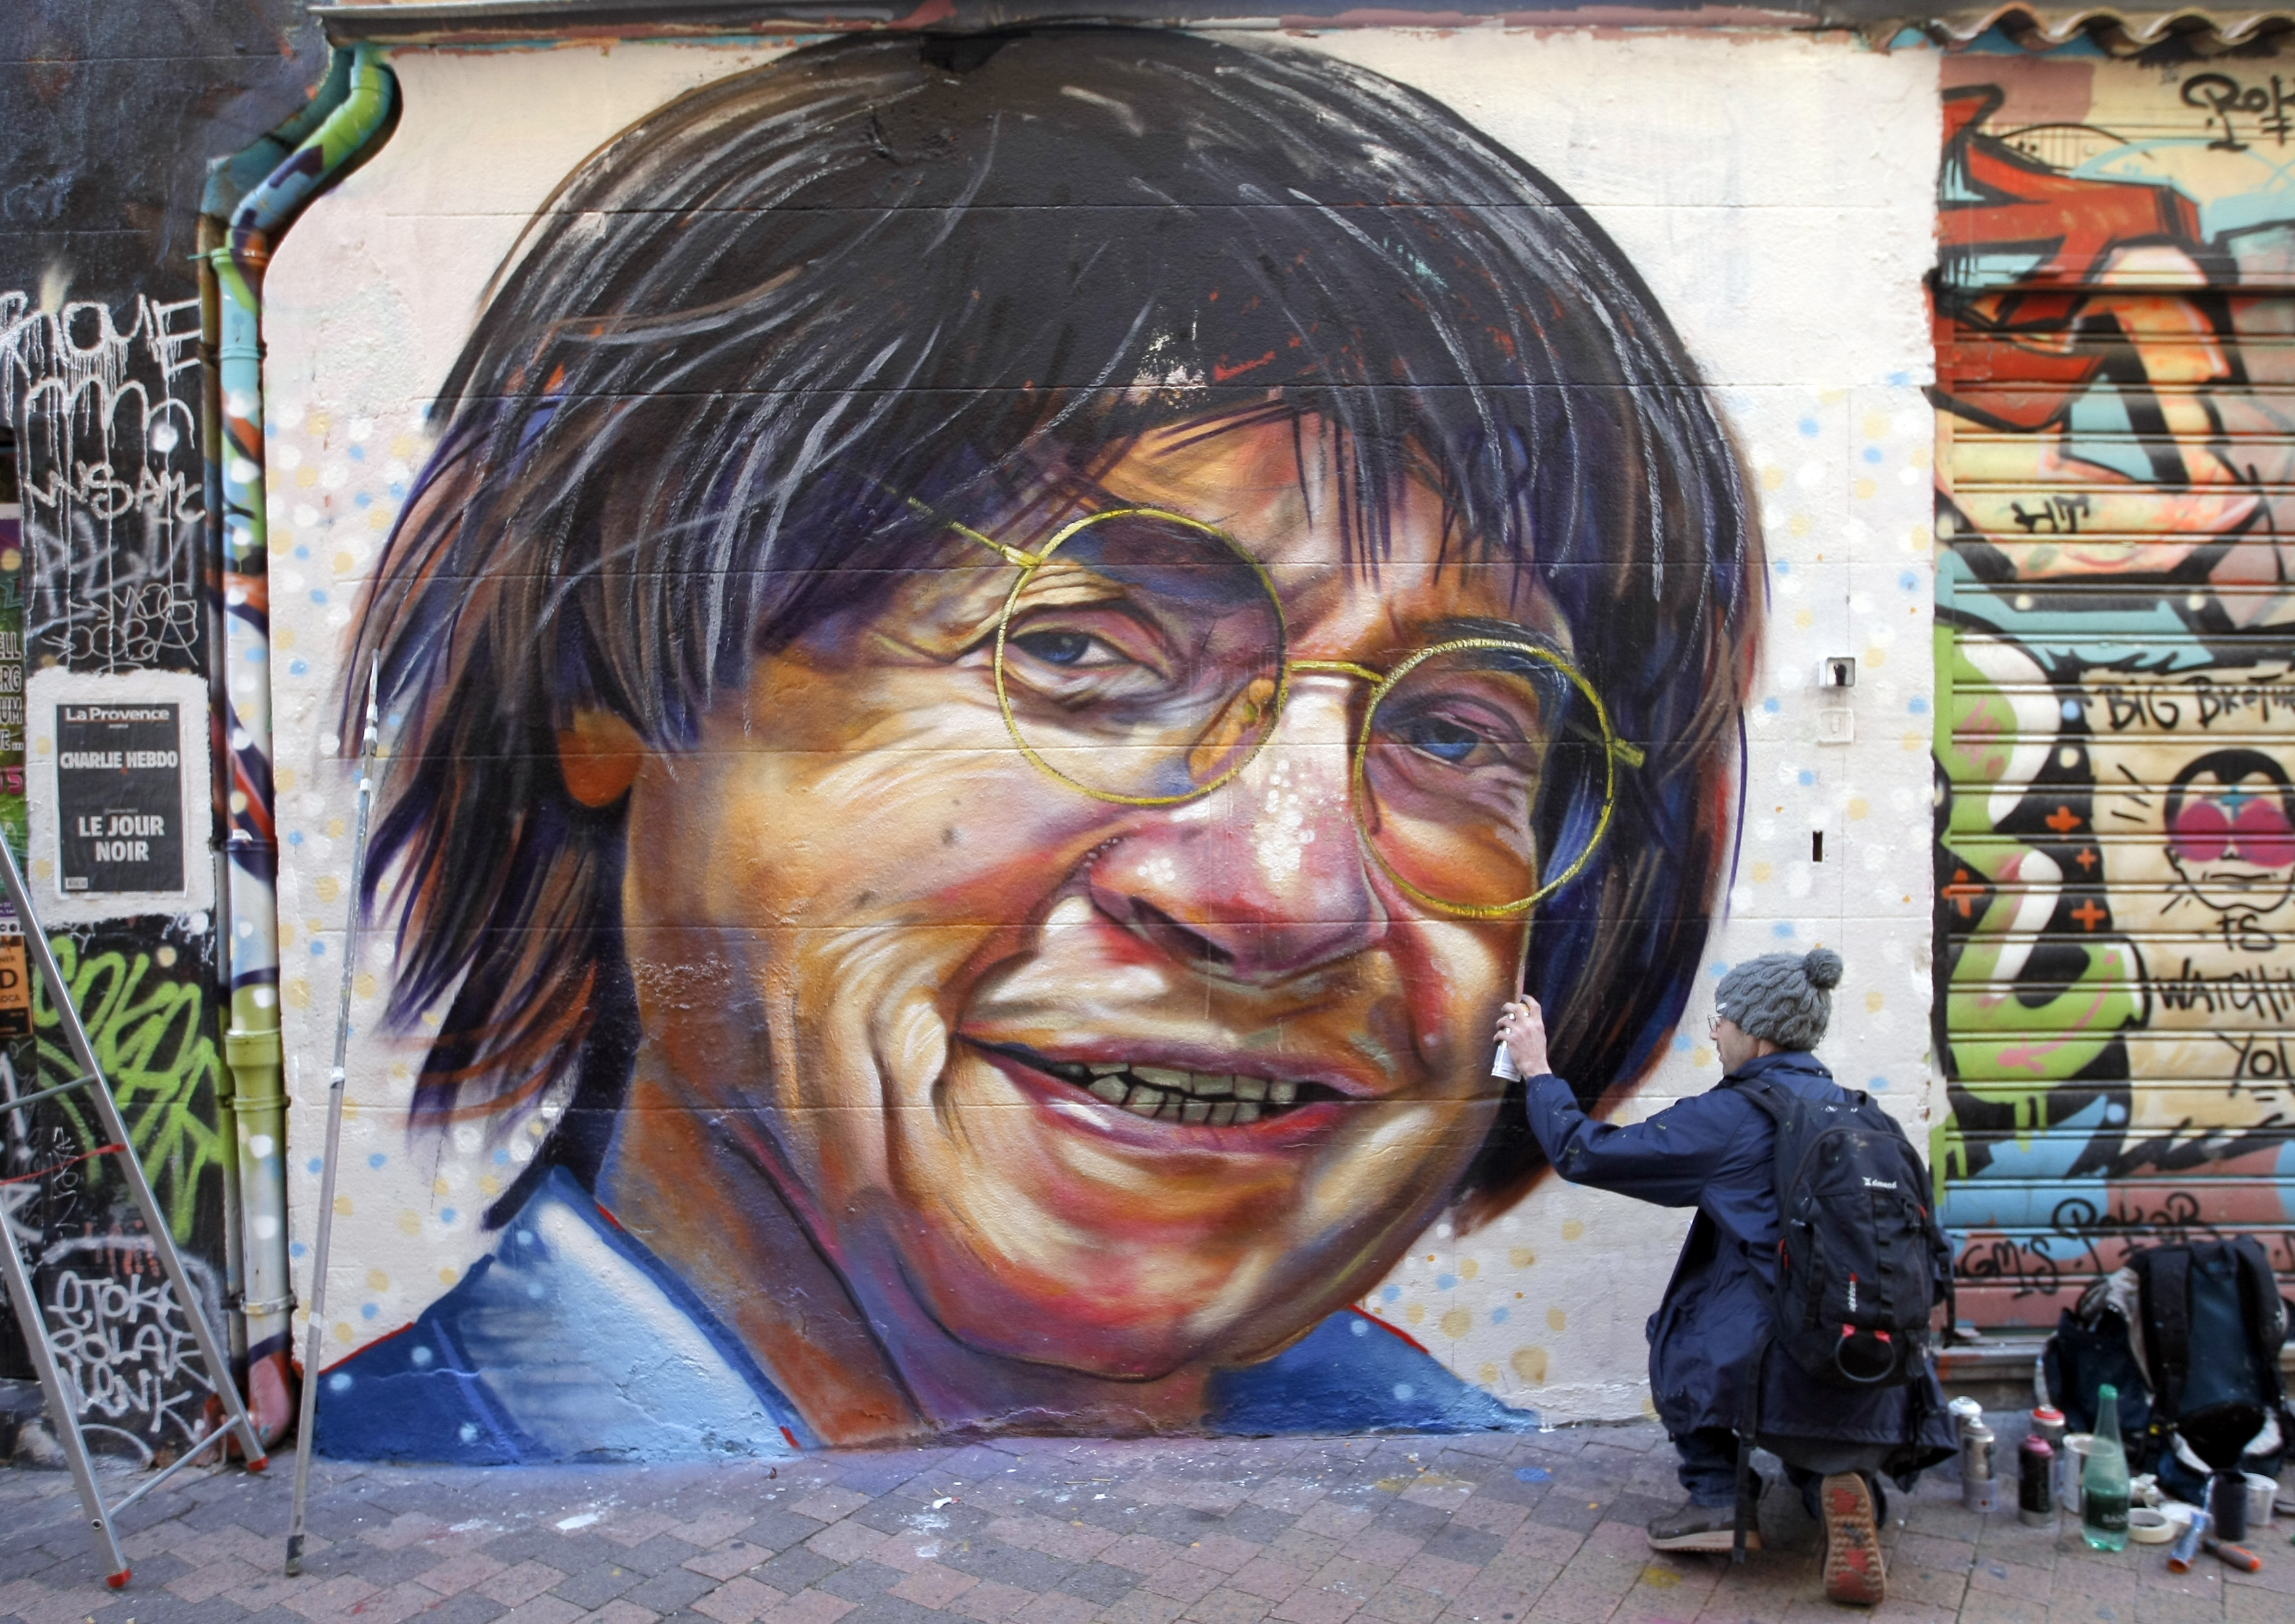 A portrait of slain French cartoonist Jean Cabut, also known as Cabu, painted by the artist Julien in Marseille, France